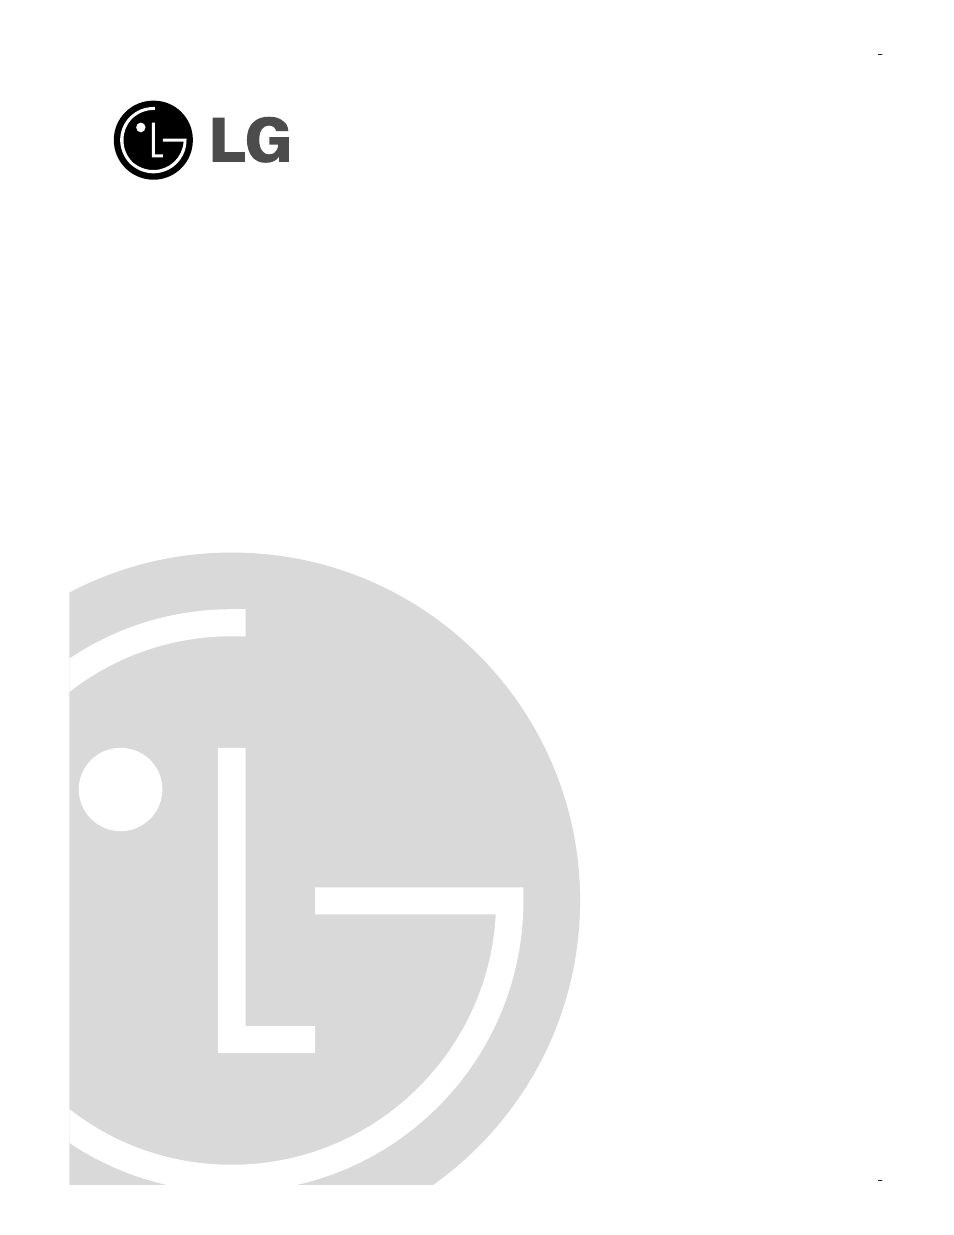 LG 202B User Manual | 20 pages